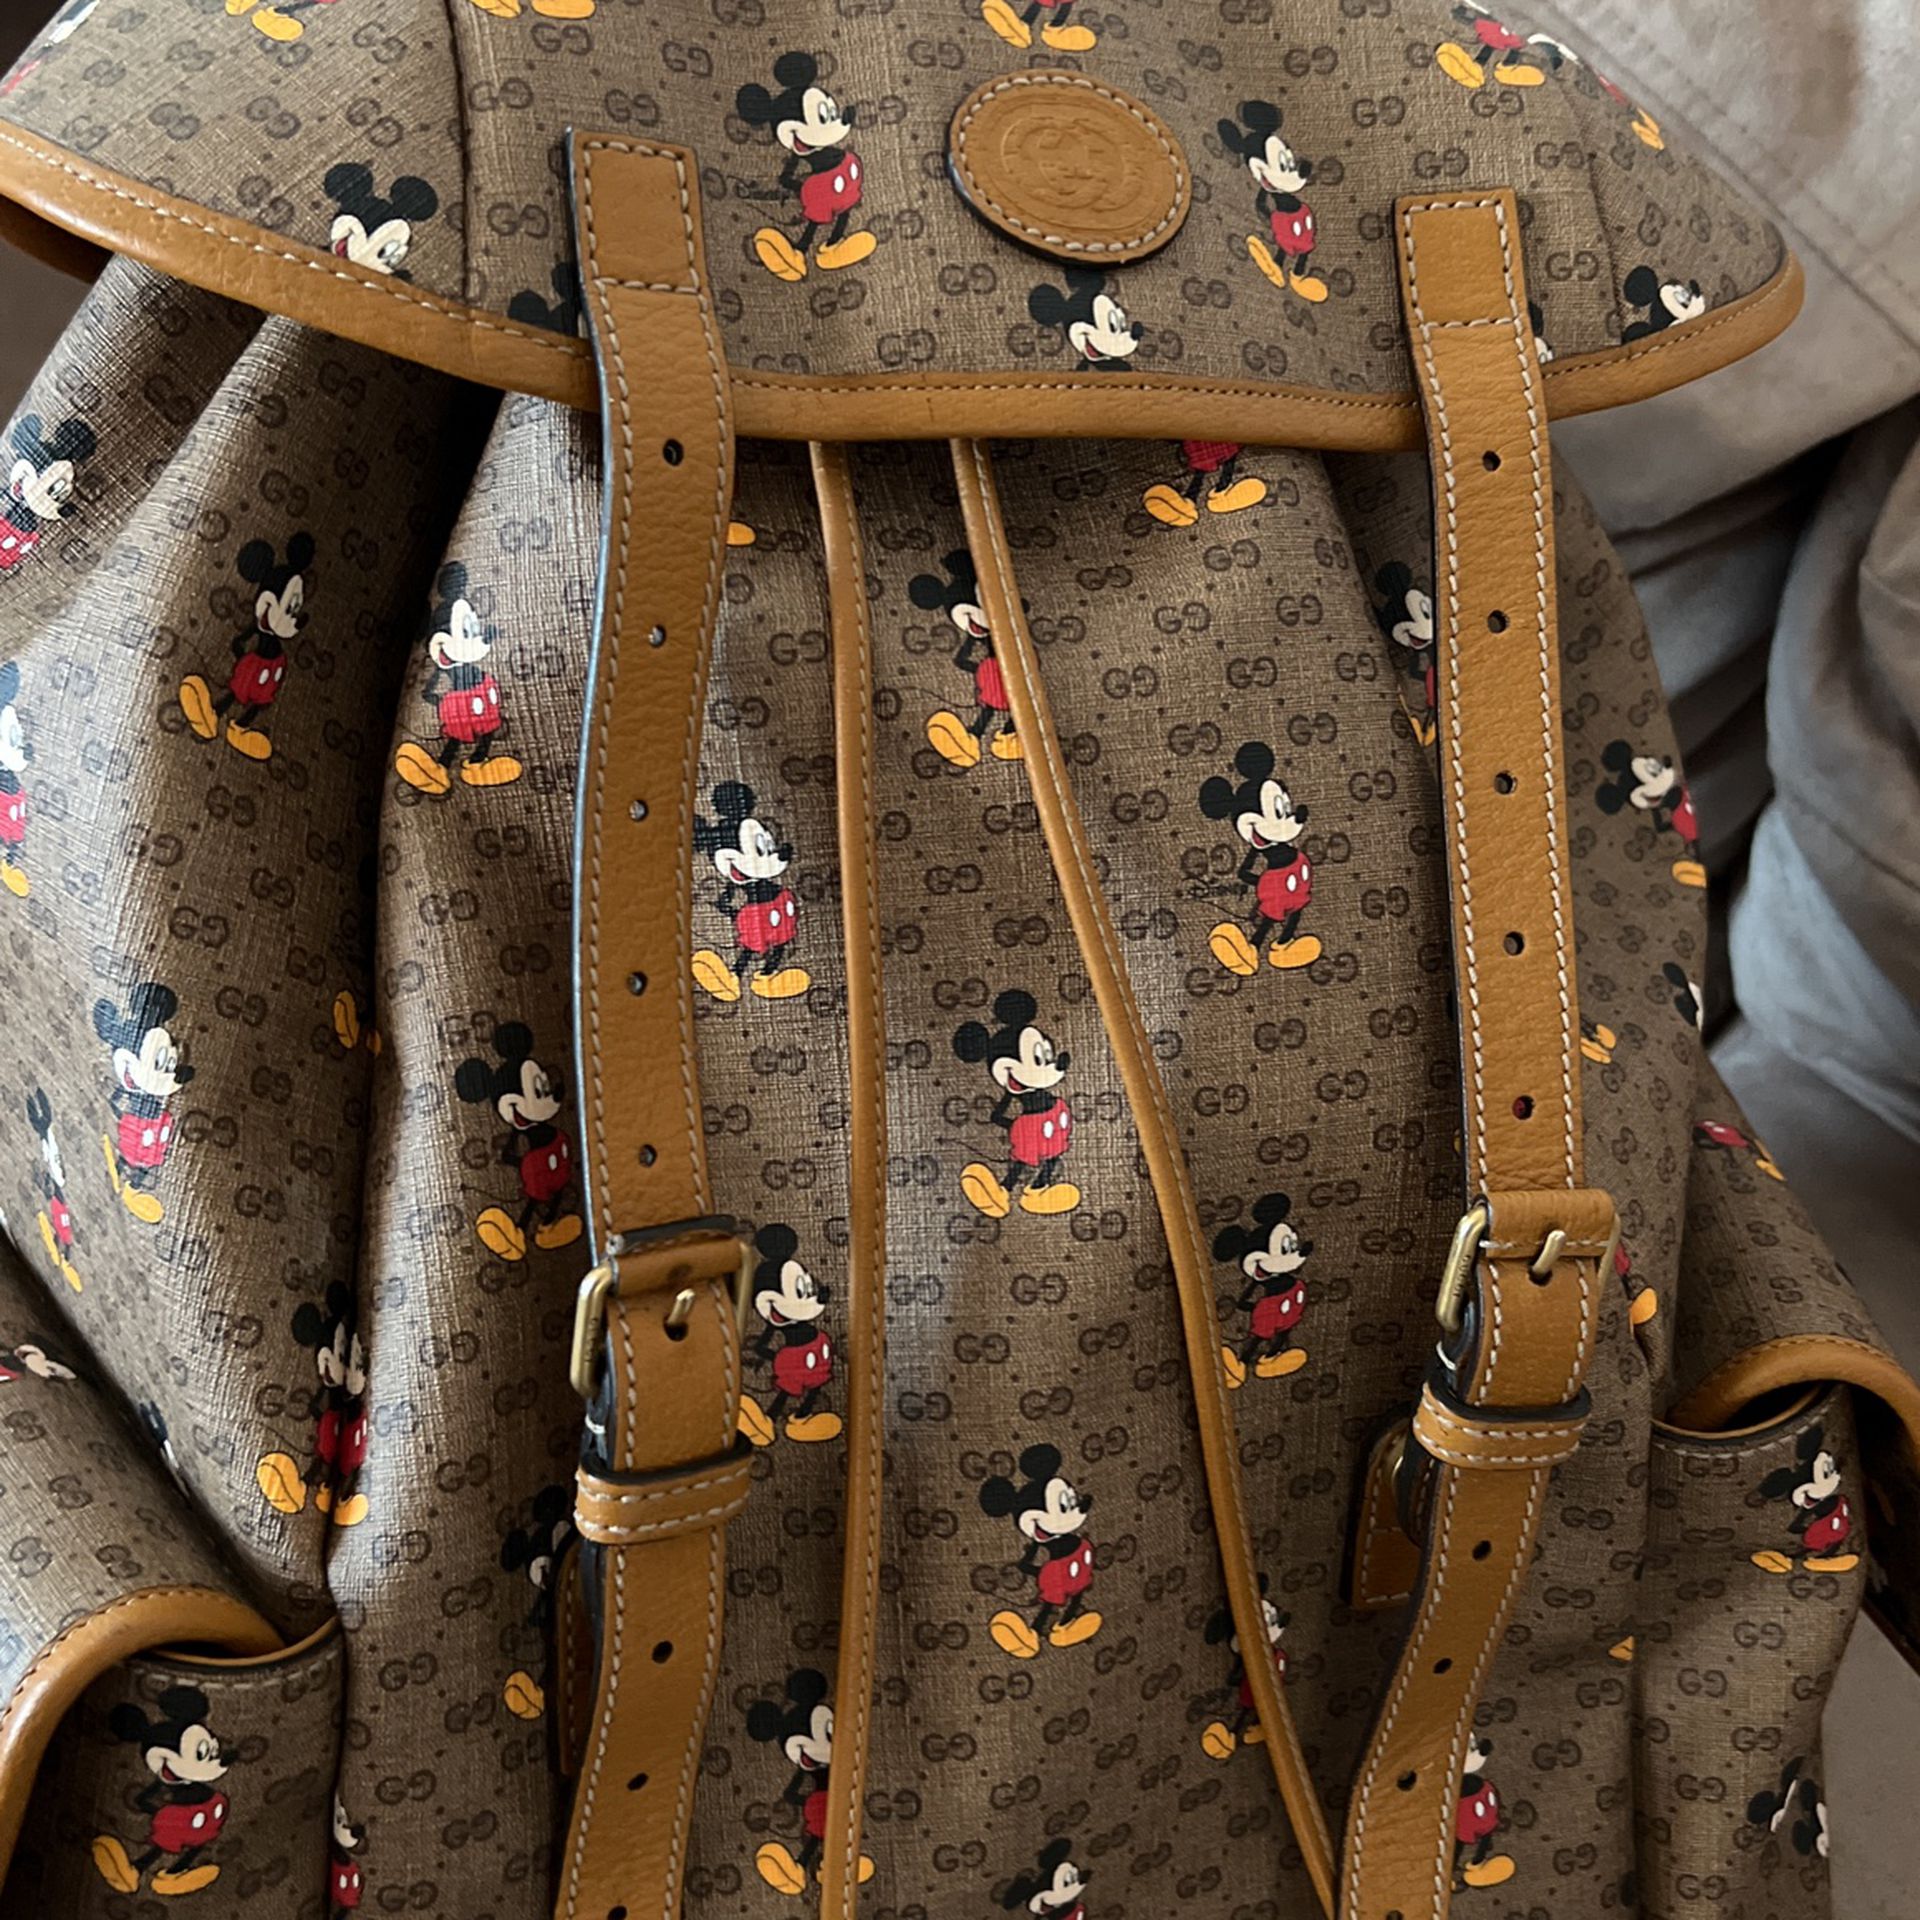 Gucci x Disney Back Pack Excellent condition. 